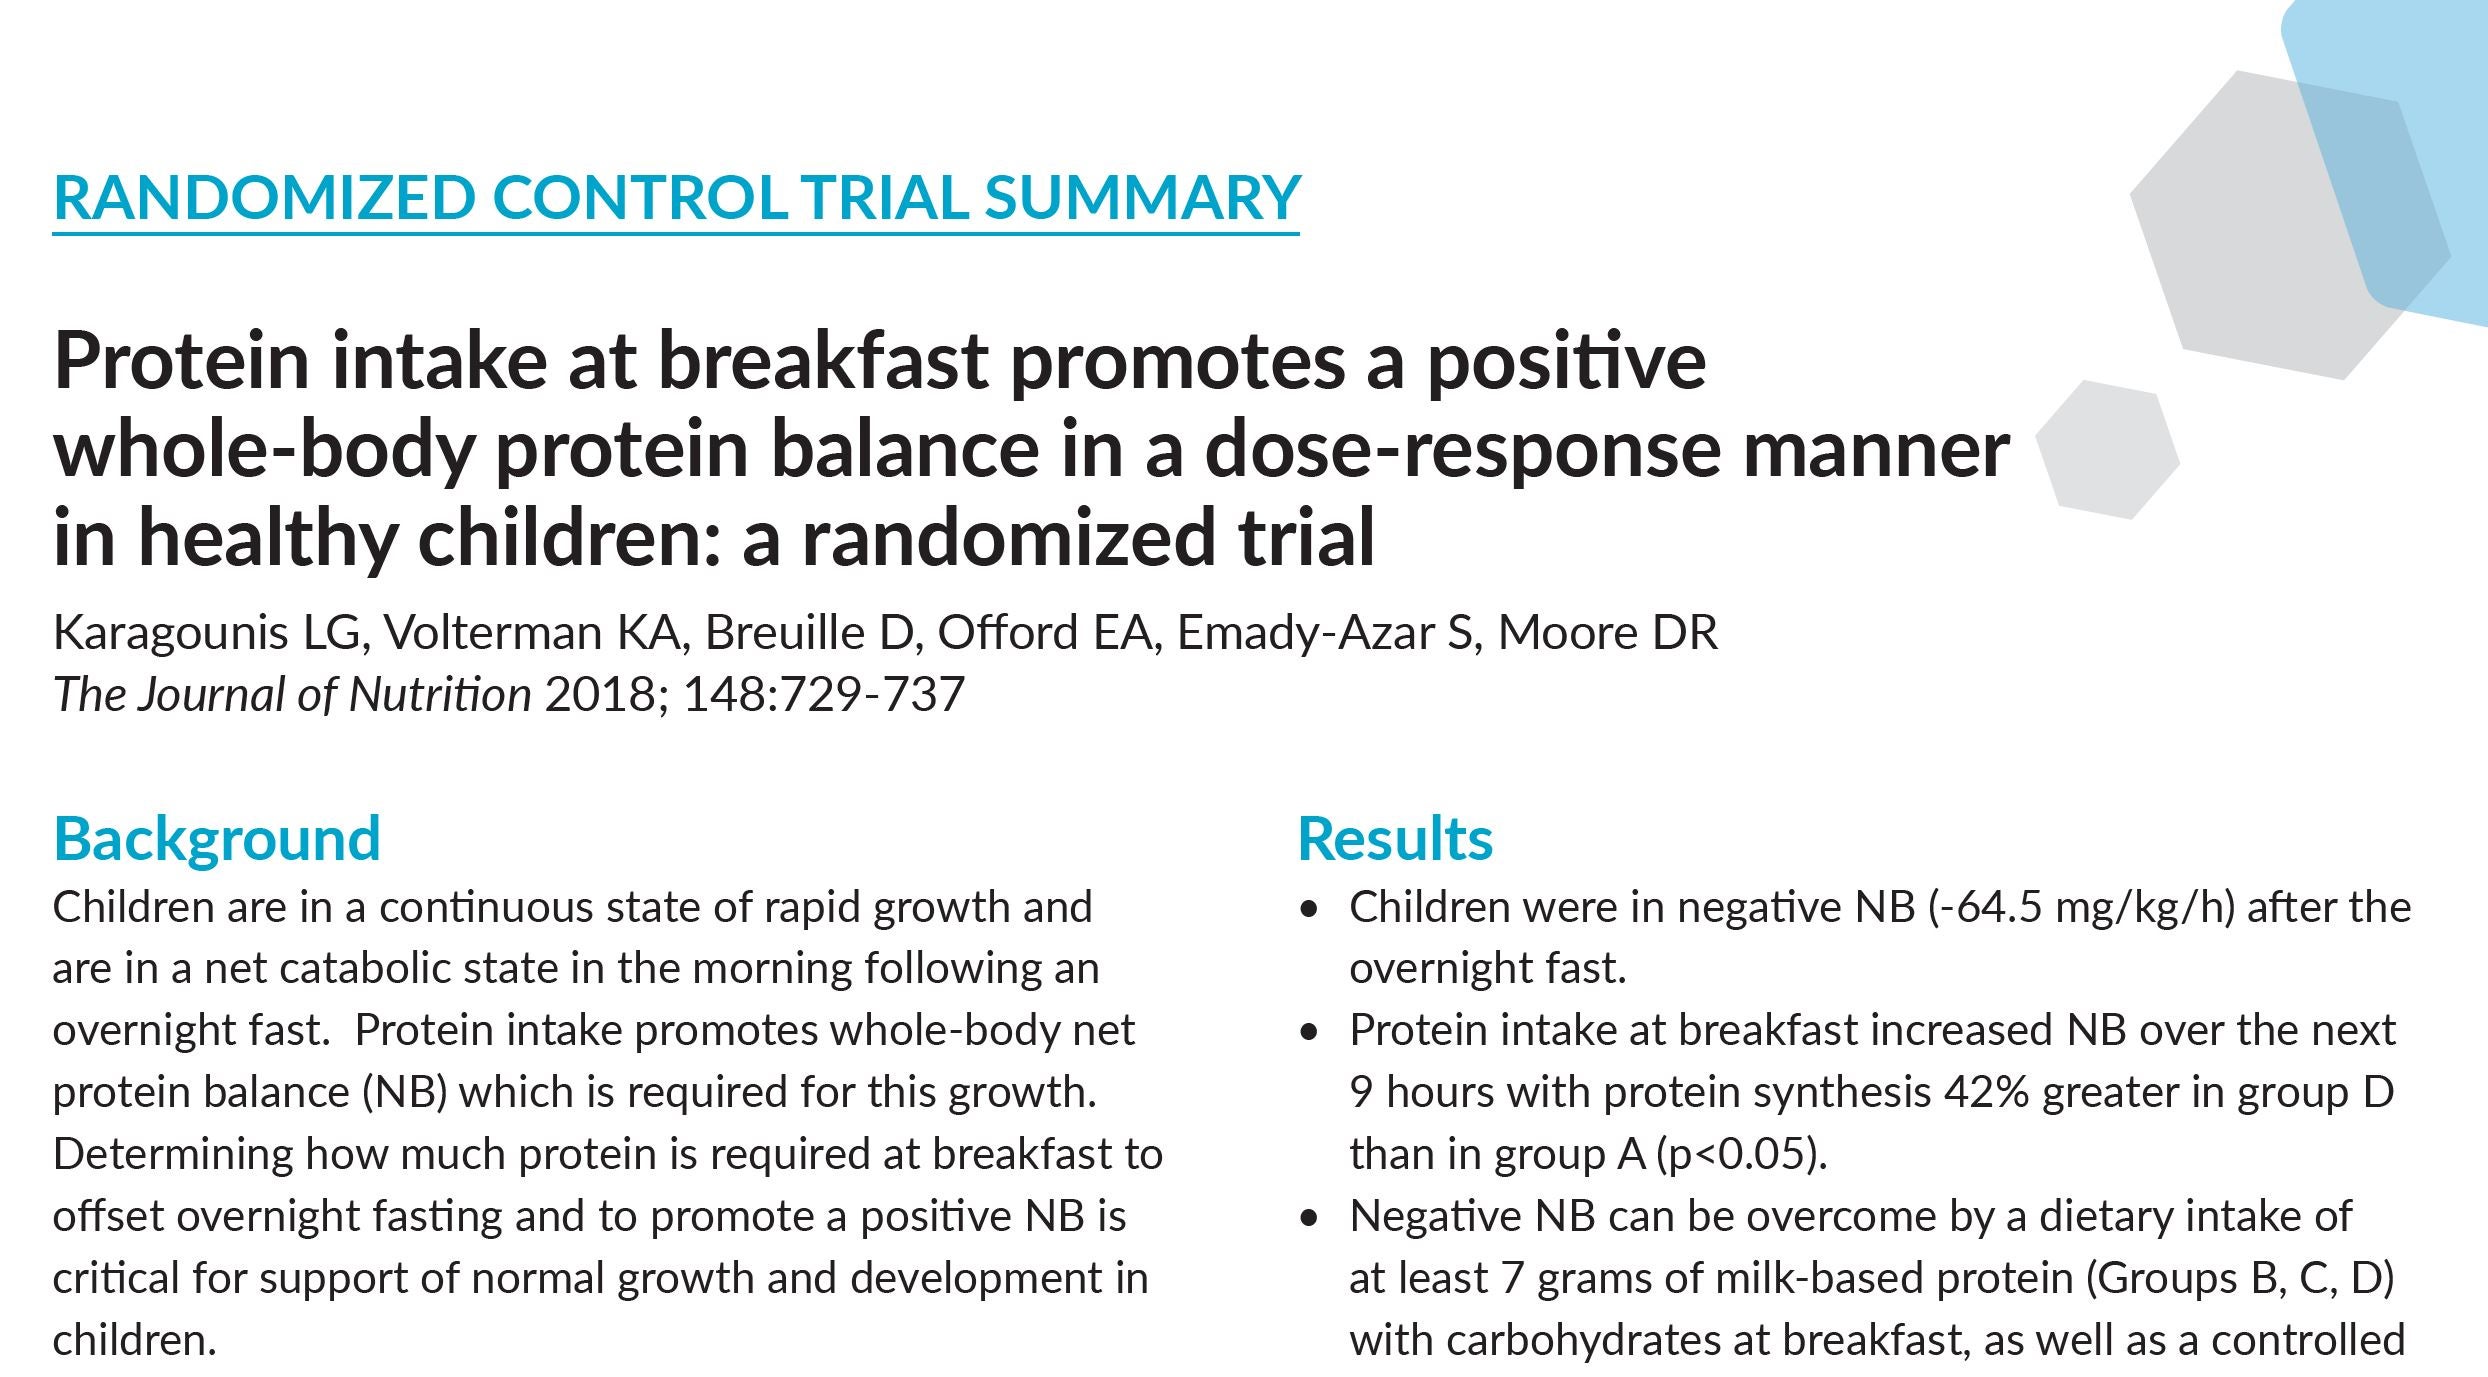 Protein Intake at Breakfast Promotes a Positive Whole-Body Protein Balance